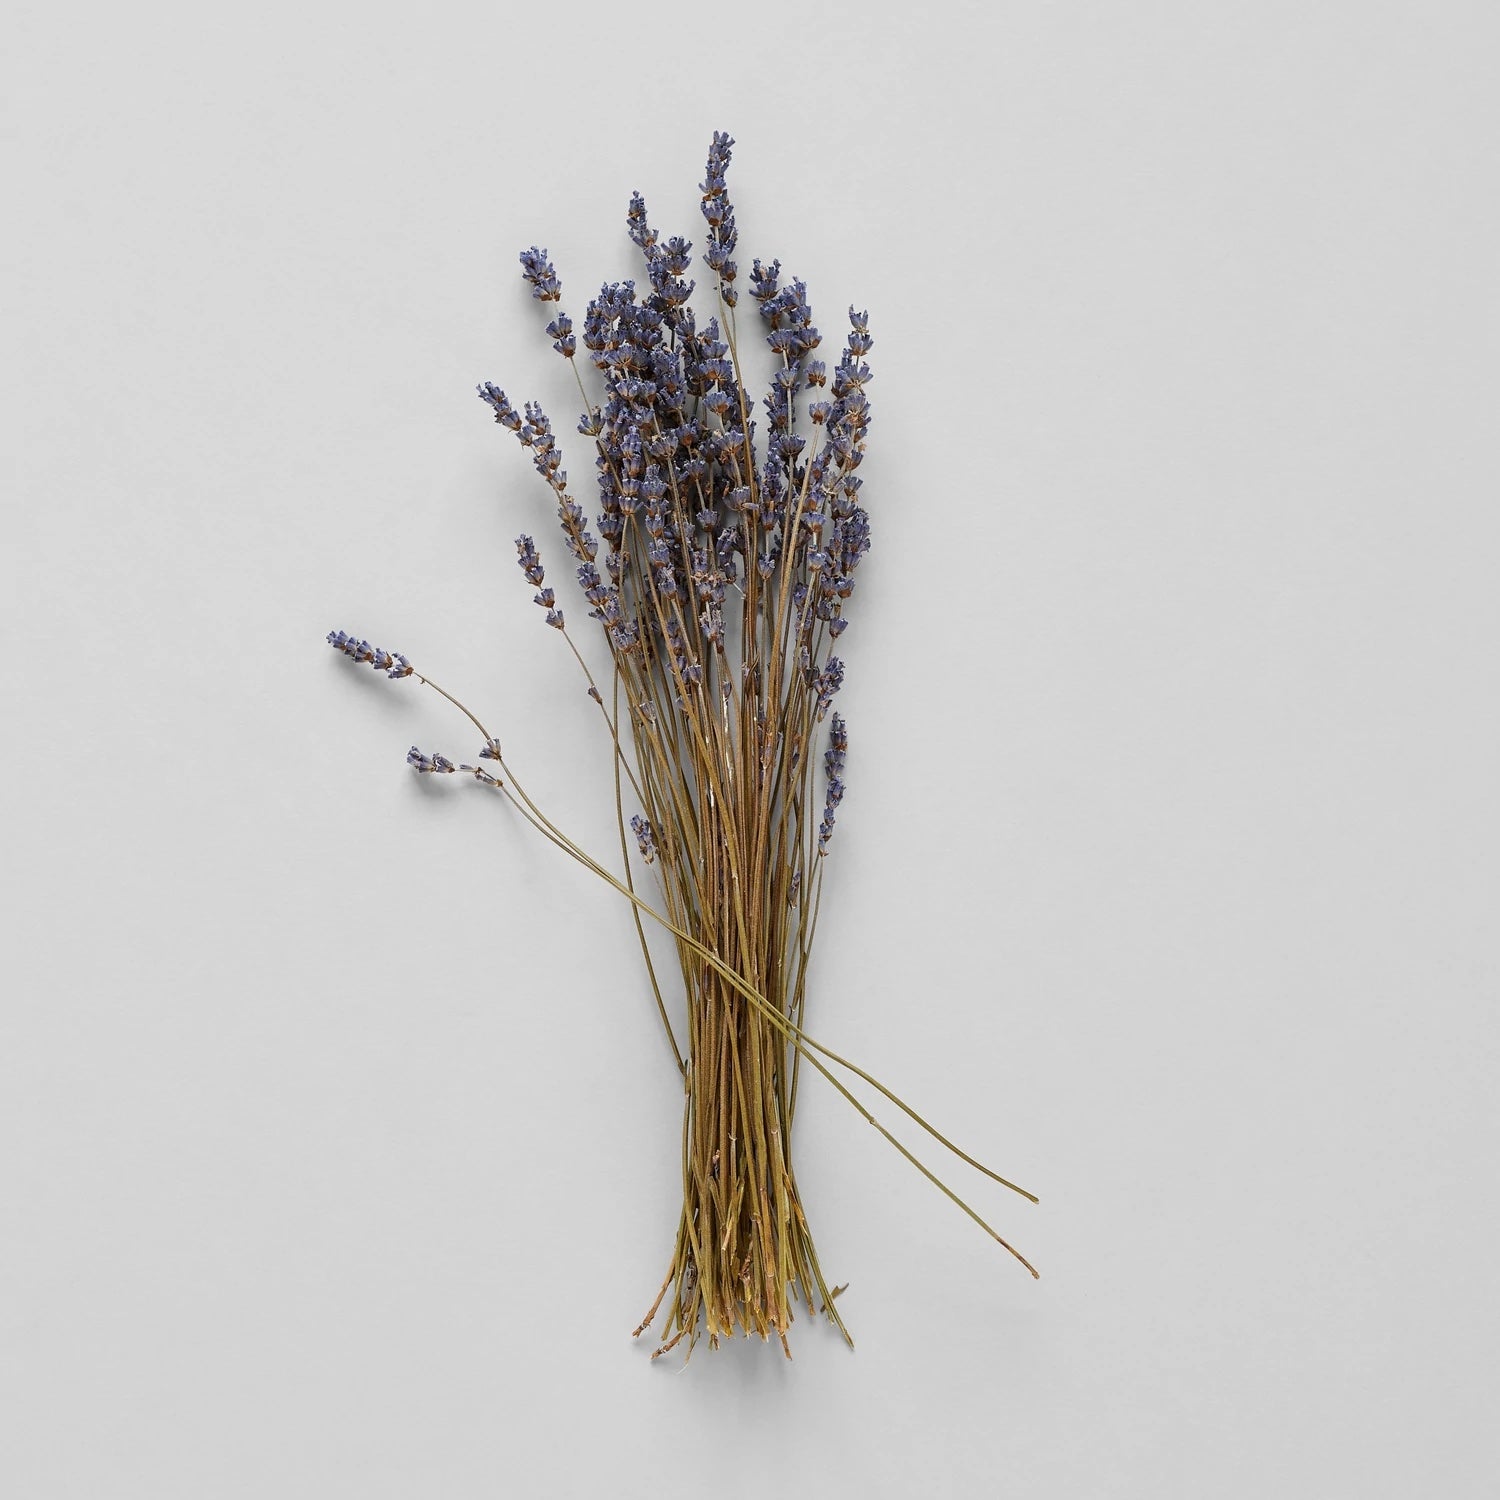 Dried Lavender Stems (Flowers)  Weir's Lane Lavender & Apiary